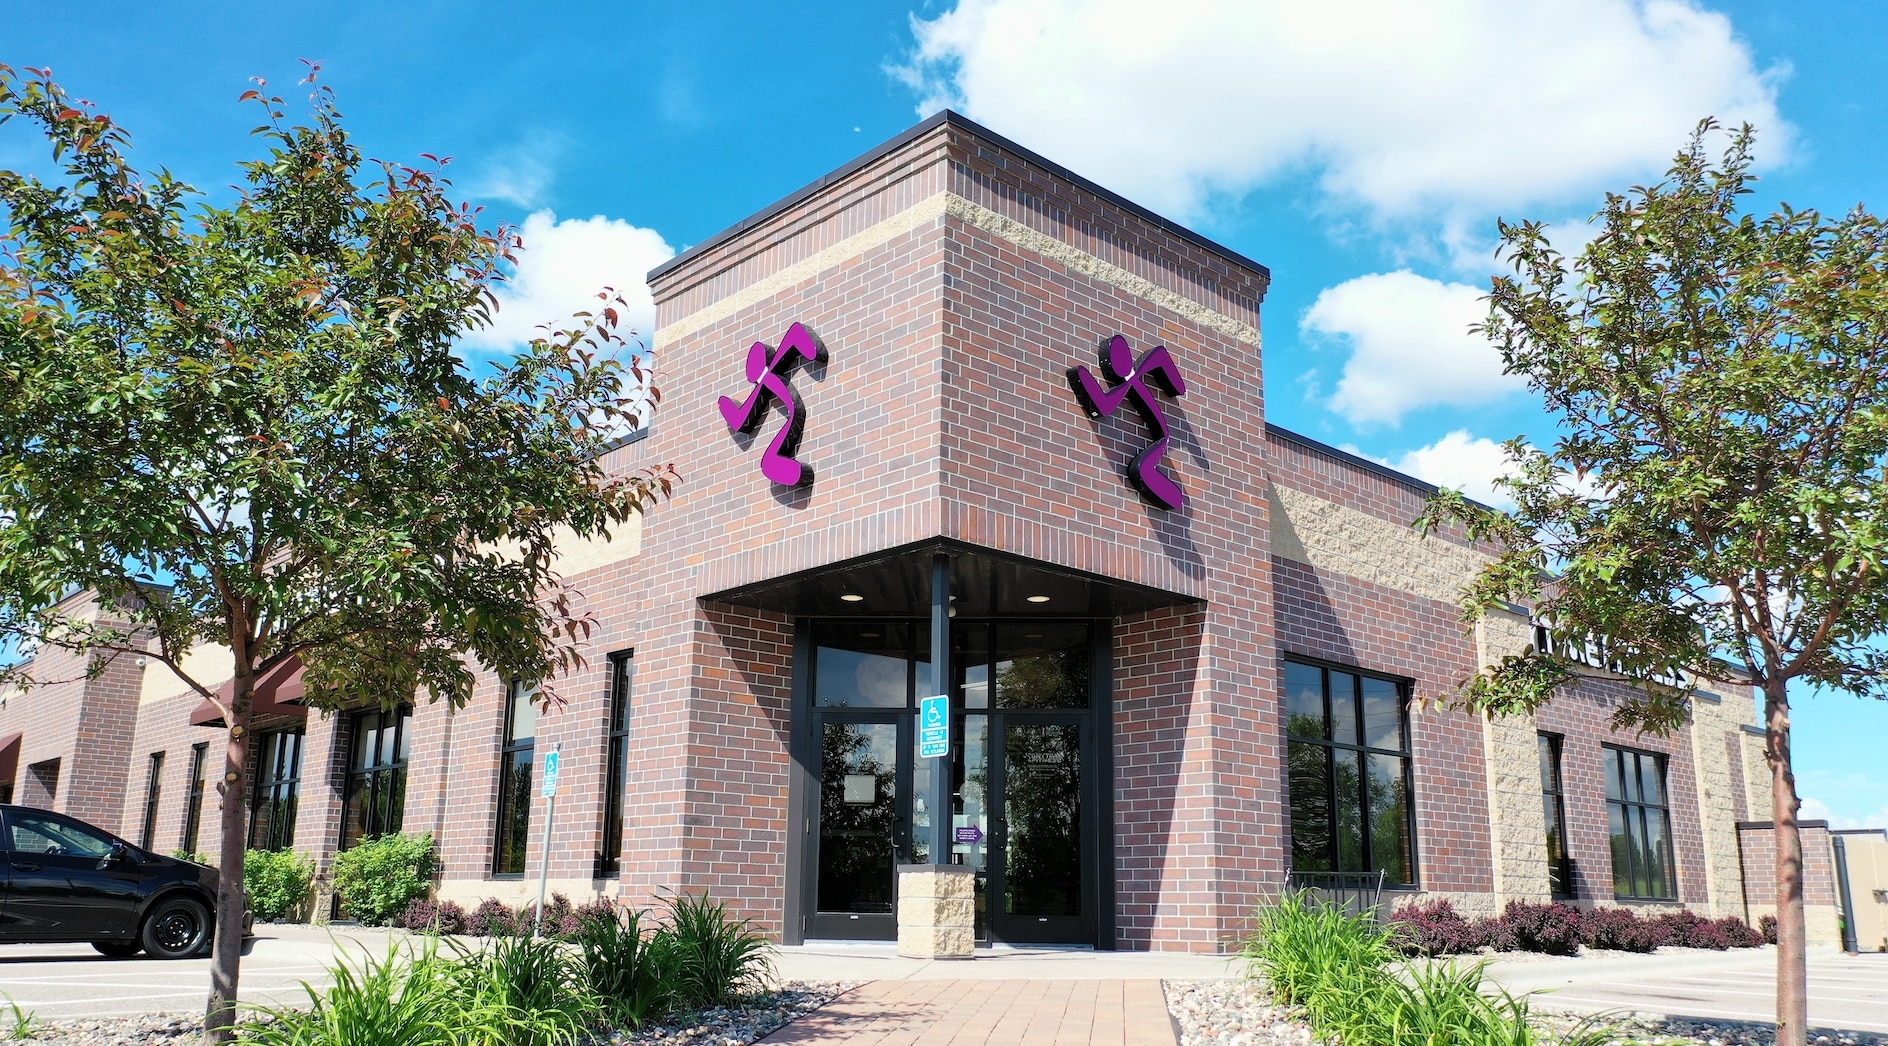 project feature of anytime fitness video production that was produced by added element